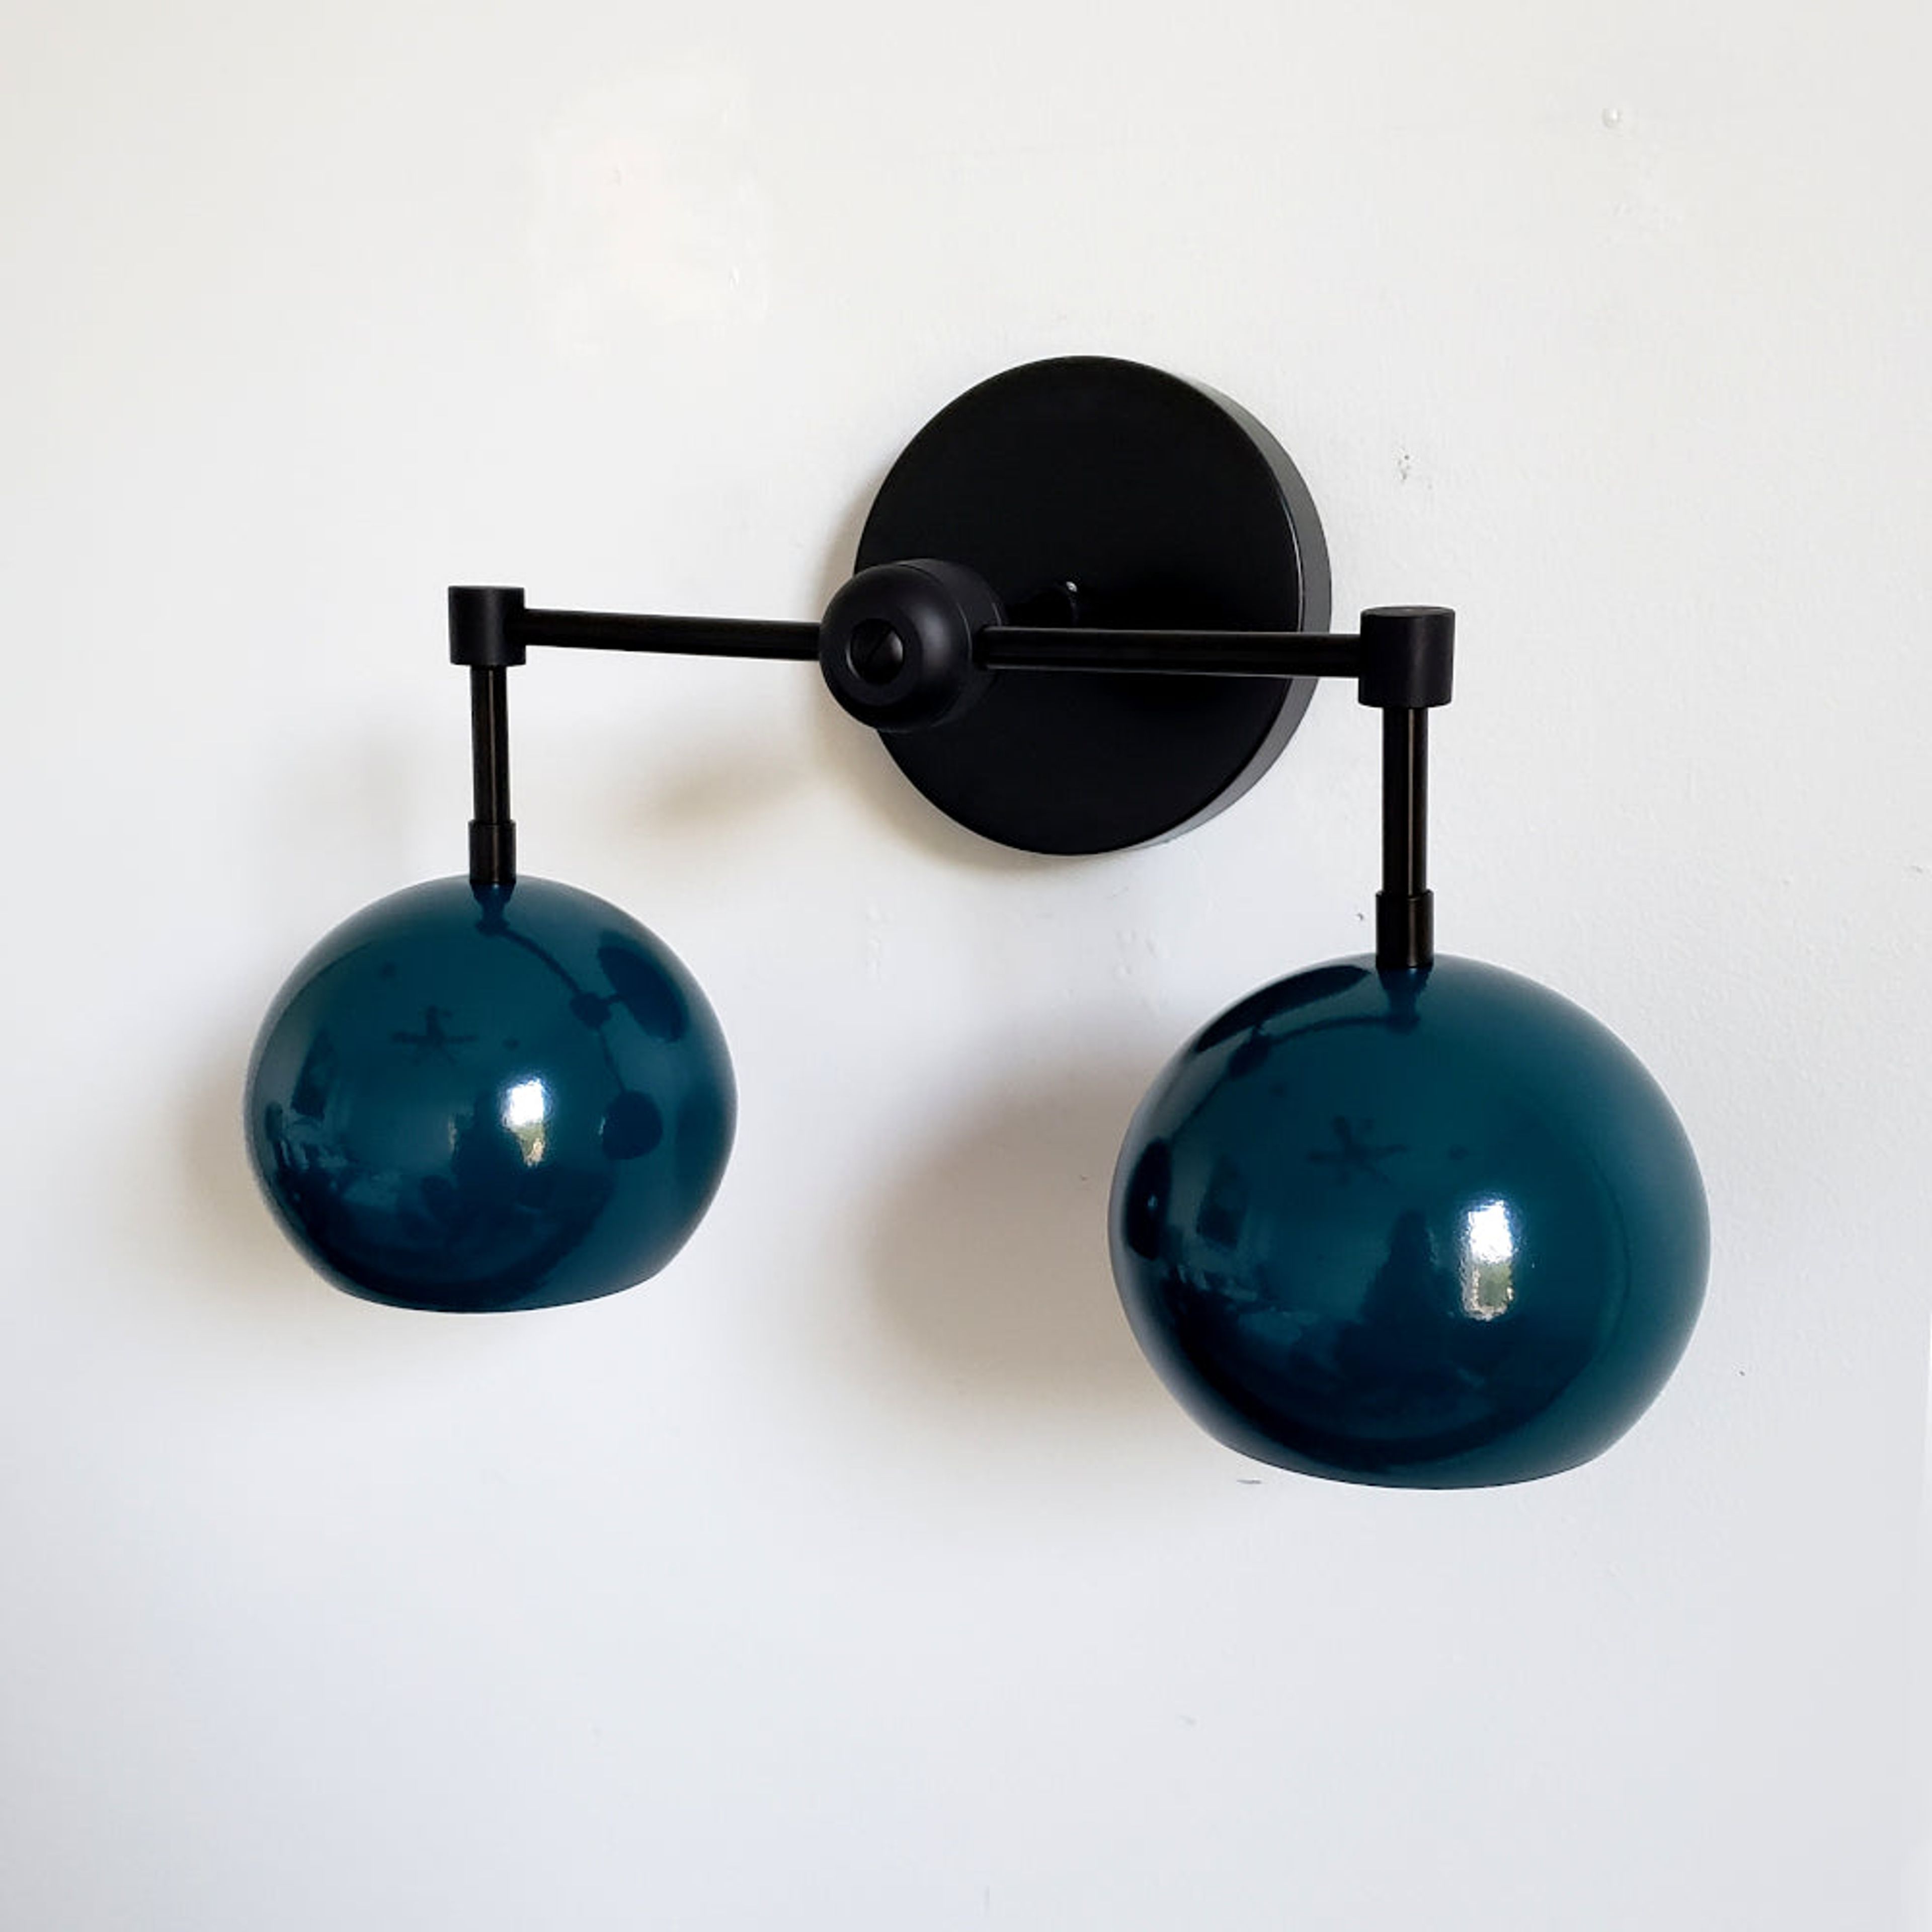 Double Loa Sconce with Lagoon Blue Shades